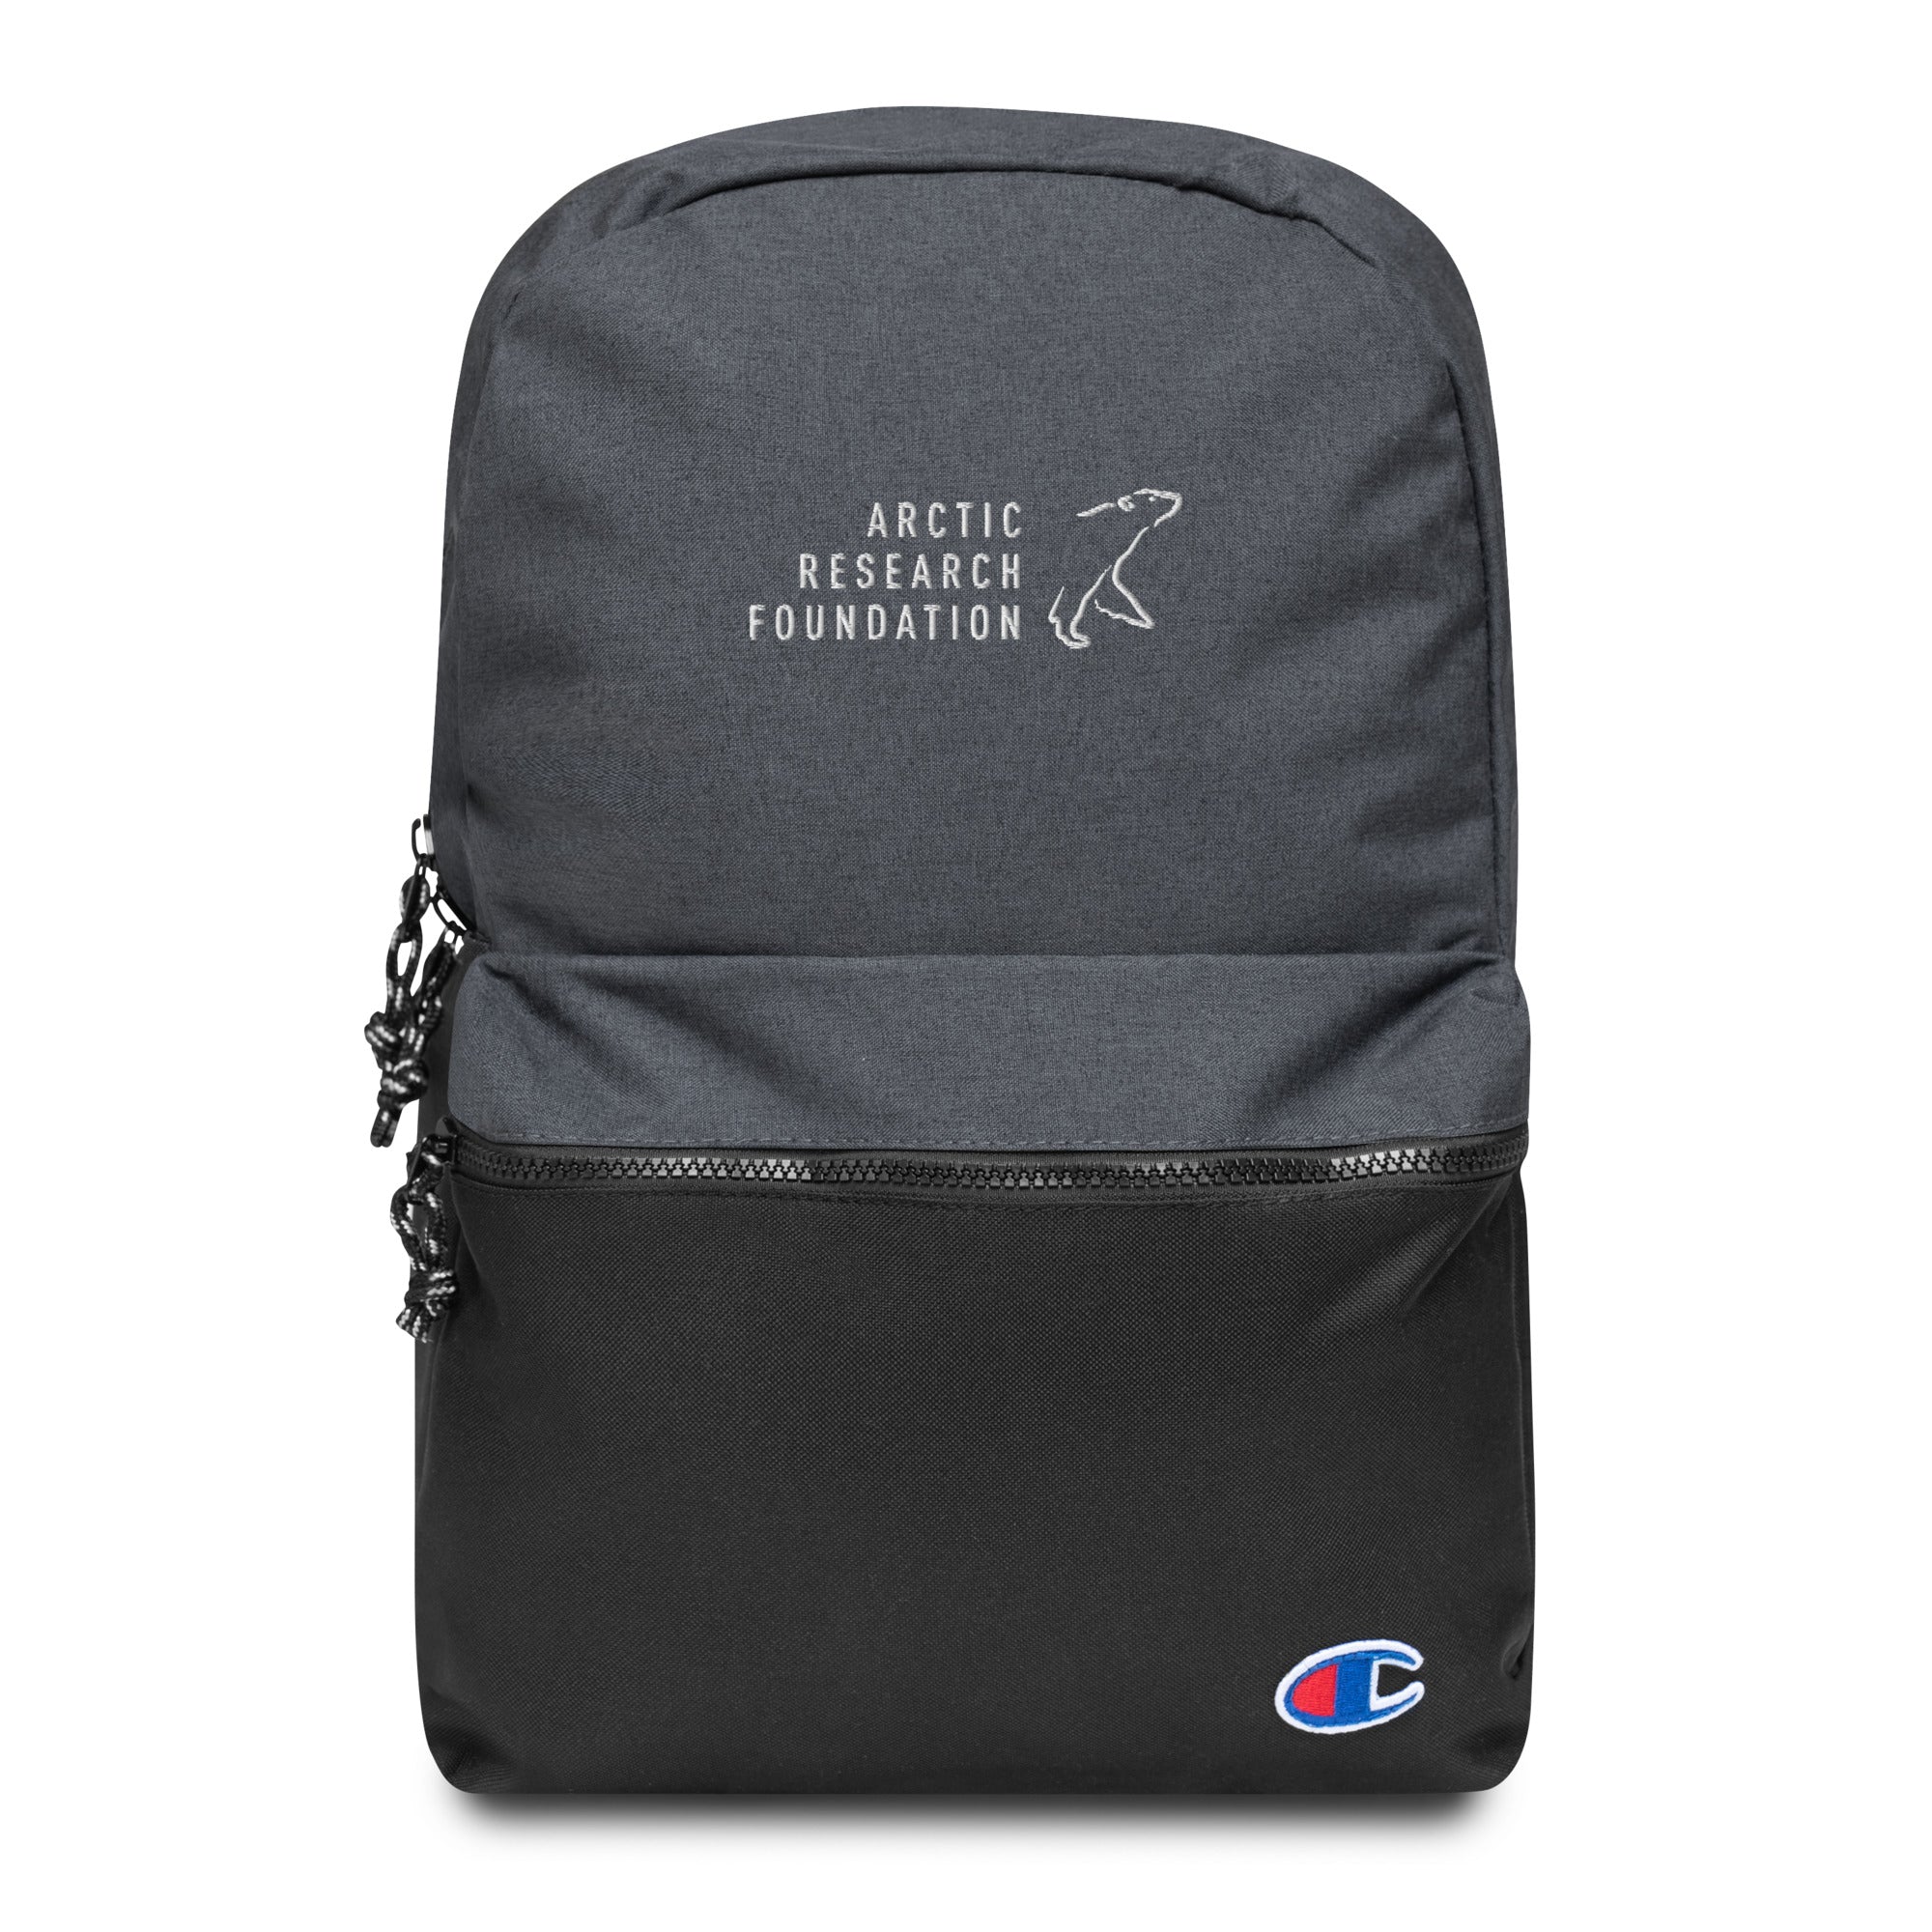 Arctic Research Foundation Backpack